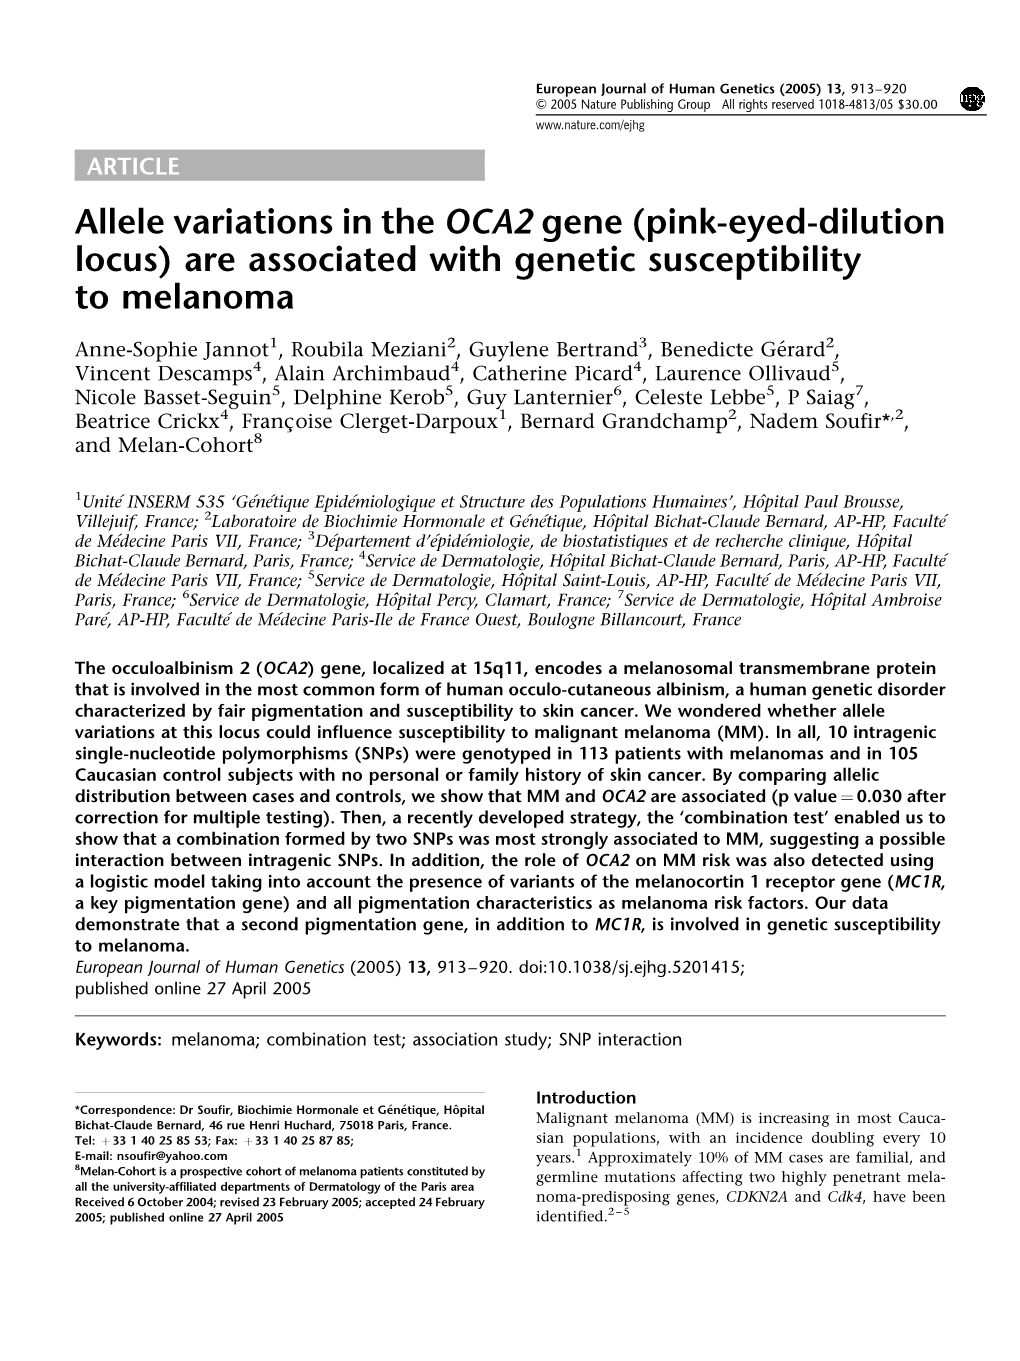 Allele Variations in the OCA2 Gene (Pink-Eyed-Dilution Locus) Are Associated with Genetic Susceptibility to Melanoma